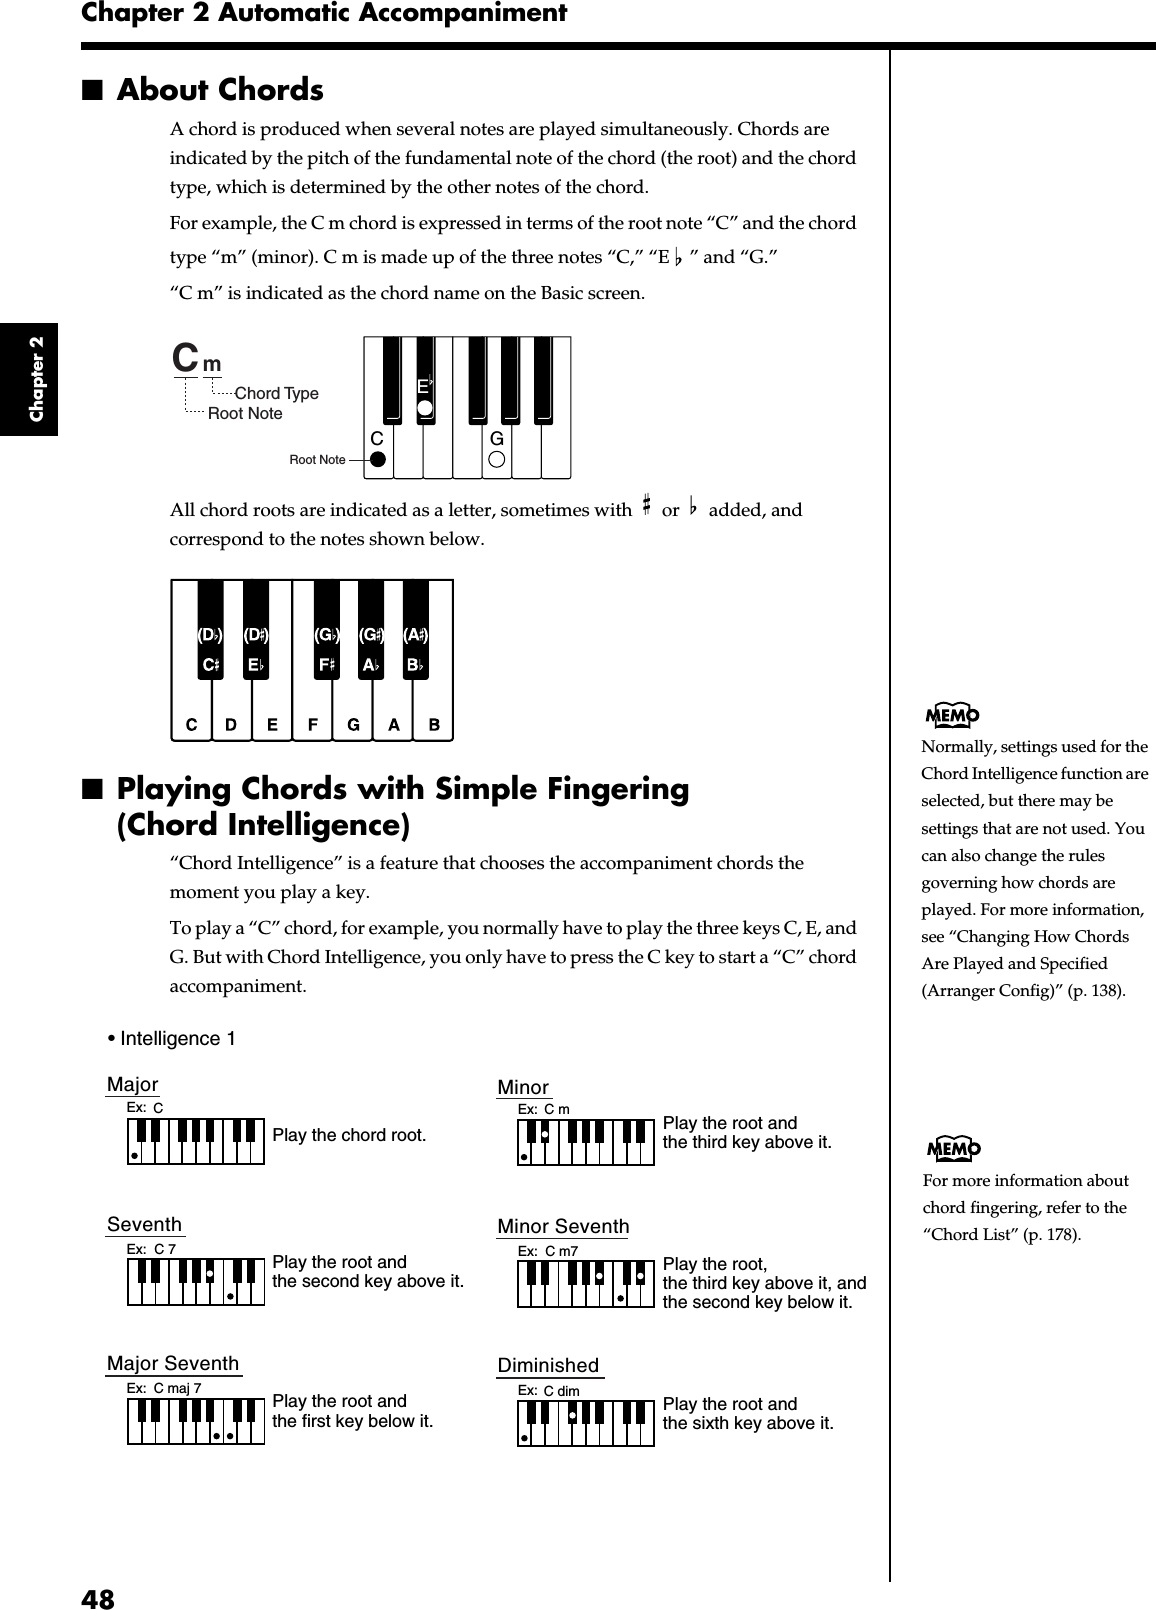 48Chapter 2 Automatic AccompanimentChapter 2■About ChordsA chord is produced when several notes are played simultaneously. Chords are indicated by the pitch of the fundamental note of the chord (the root) and the chord type, which is determined by the other notes of the chord.For example, the C m chord is expressed in terms of the root note “C” and the chord type “m” (minor). C m is made up of the three notes “C,” “E ” and “G.”“C m” is indicated as the chord name on the Basic screen. fig.chord.eAll chord roots are indicated as a letter, sometimes with   or   added, and correspond to the notes shown below.fig.chord-root.e■Playing Chords with Simple Fingering (Chord Intelligence)“Chord Intelligence” is a feature that chooses the accompaniment chords the moment you play a key.To play a “C” chord, for example, you normally have to play the three keys C, E, and G. But with Chord Intelligence, you only have to press the C key to start a “C” chord accompaniment.fig.chord-intel.eCGECmRoot NoteChord TypeRoot NoteNormally, settings used for the Chord Intelligence function are selected, but there may be settings that are not used. You can also change the rules governing how chords are played. For more information, see “Changing How Chords Are Played and Specified (Arranger Config)” (p. 138).CC maj 7C 7C mC m7C dimEx:Ex:Ex: Ex:Ex:Ex:MajorSeventhMajor SeventhMinorMinor SeventhDiminishedPlay the chord root.Play the root and the second key above it.Play the root and the third key above it.Play the root and the sixth key above it.Play the root, the third key above it, and the second key below it.Play the root and the first key below it.• Intelligence 1For more information about chord fingering, refer to the “Chord List” (p. 178).